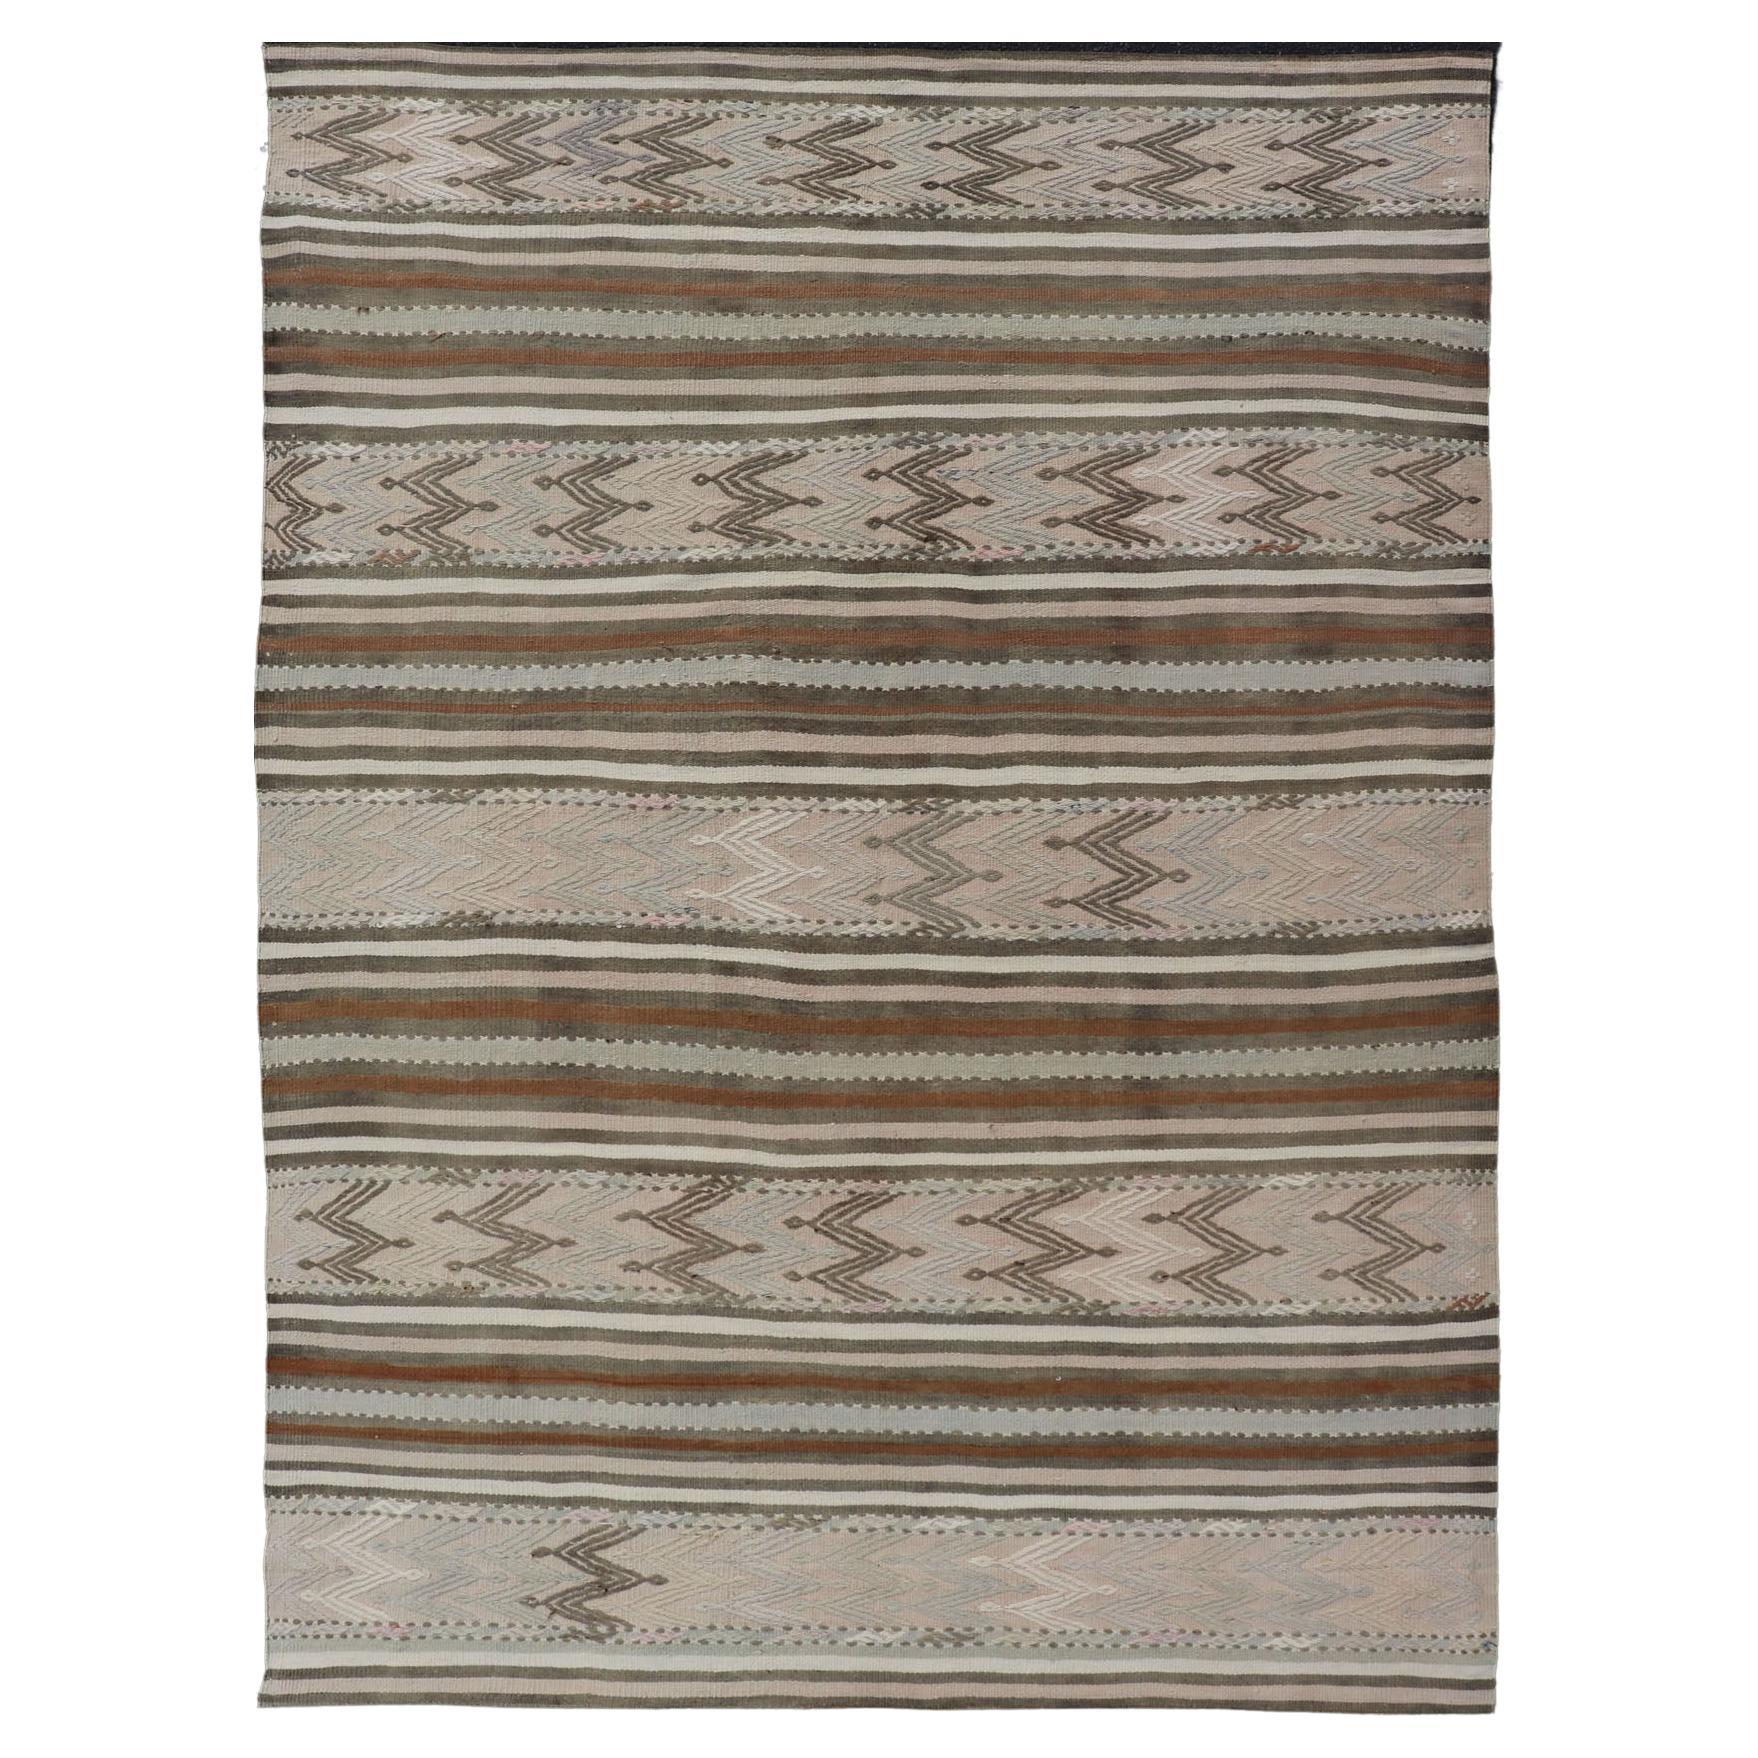 Turkish Flat-Weave Kilim in Muted Colors with Stripes and Embroideries